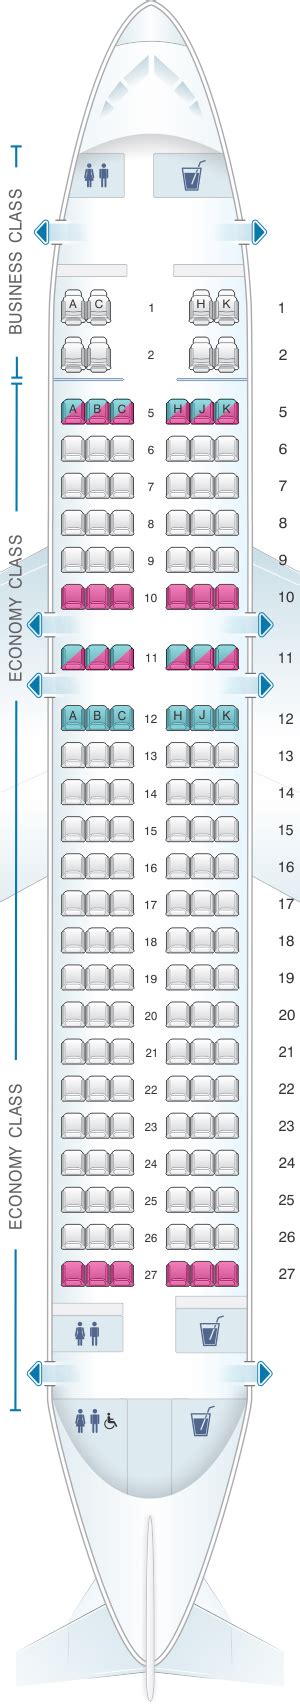 Aircraft Airbus A320neo Seat Map Image To U